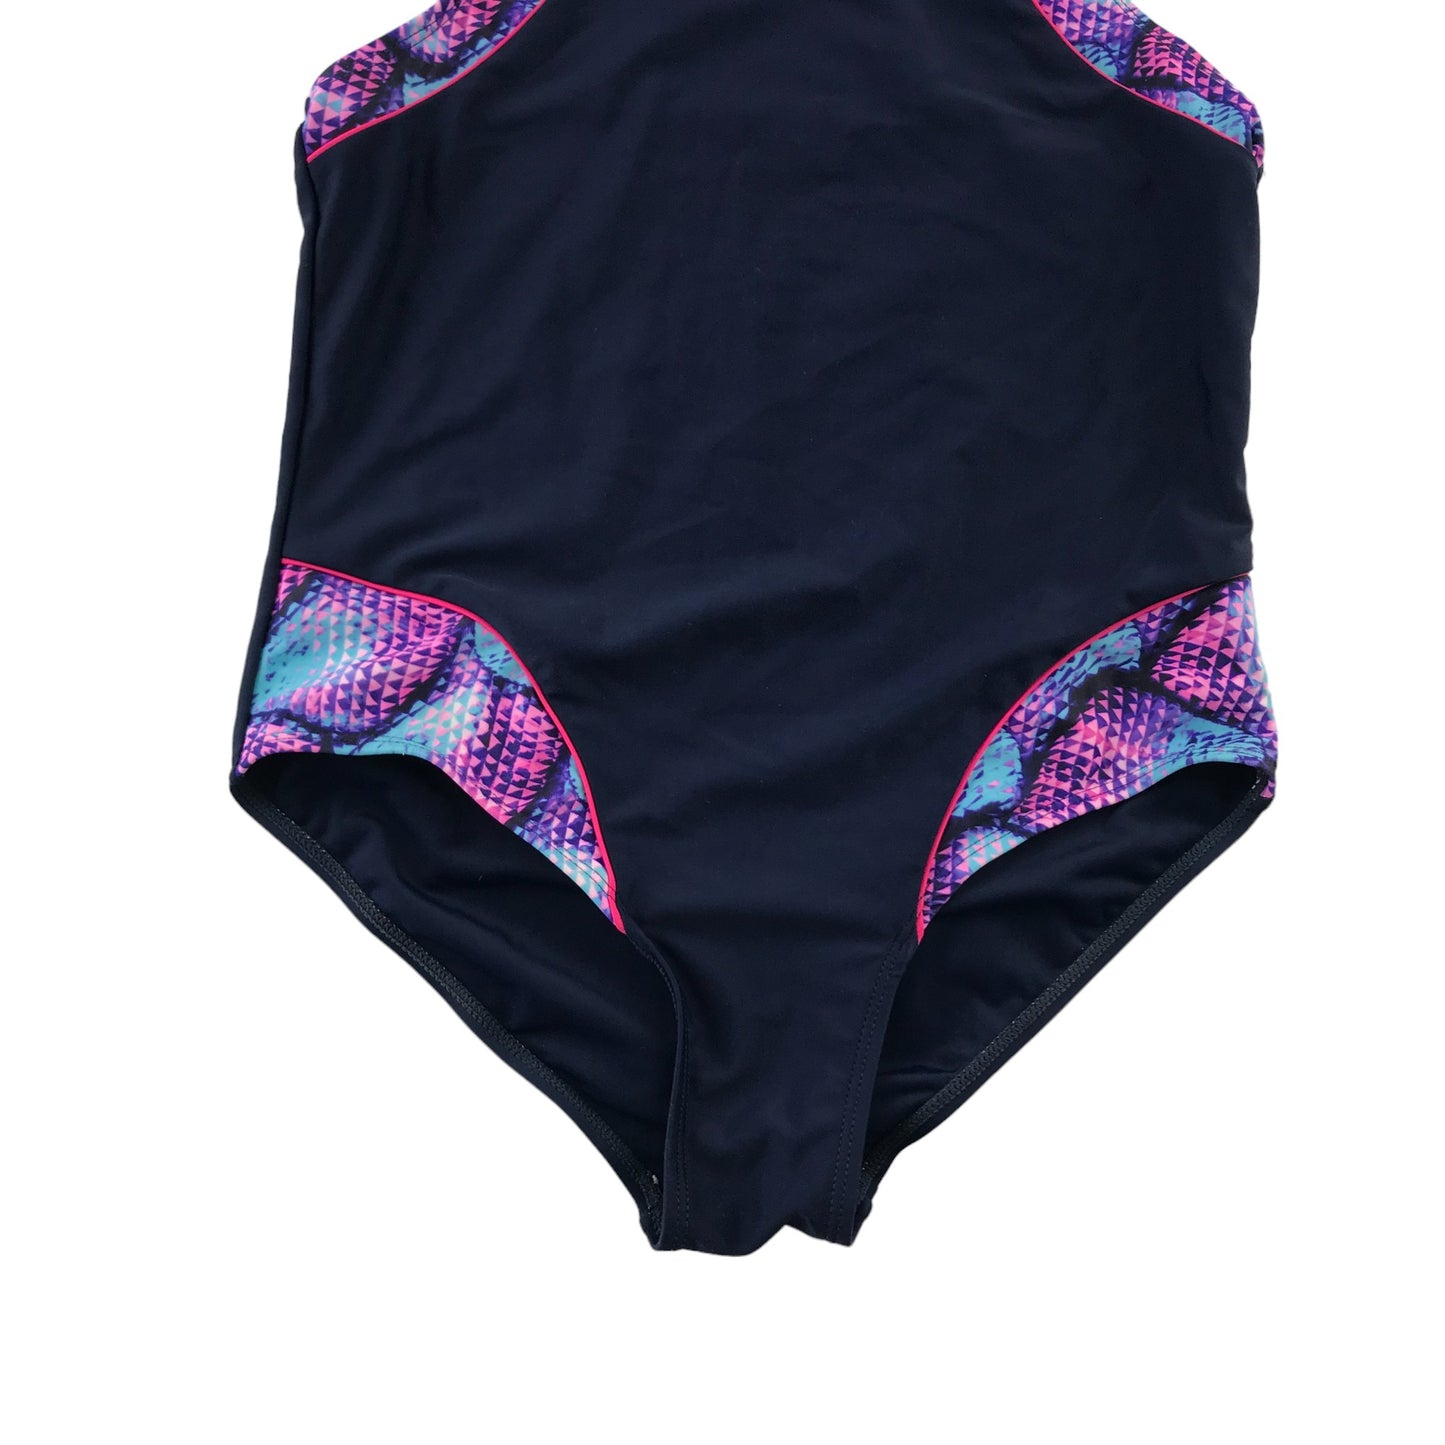 Nutmeg swimsuit 11-12 years navy blue purple graphic detailed one piece cossie